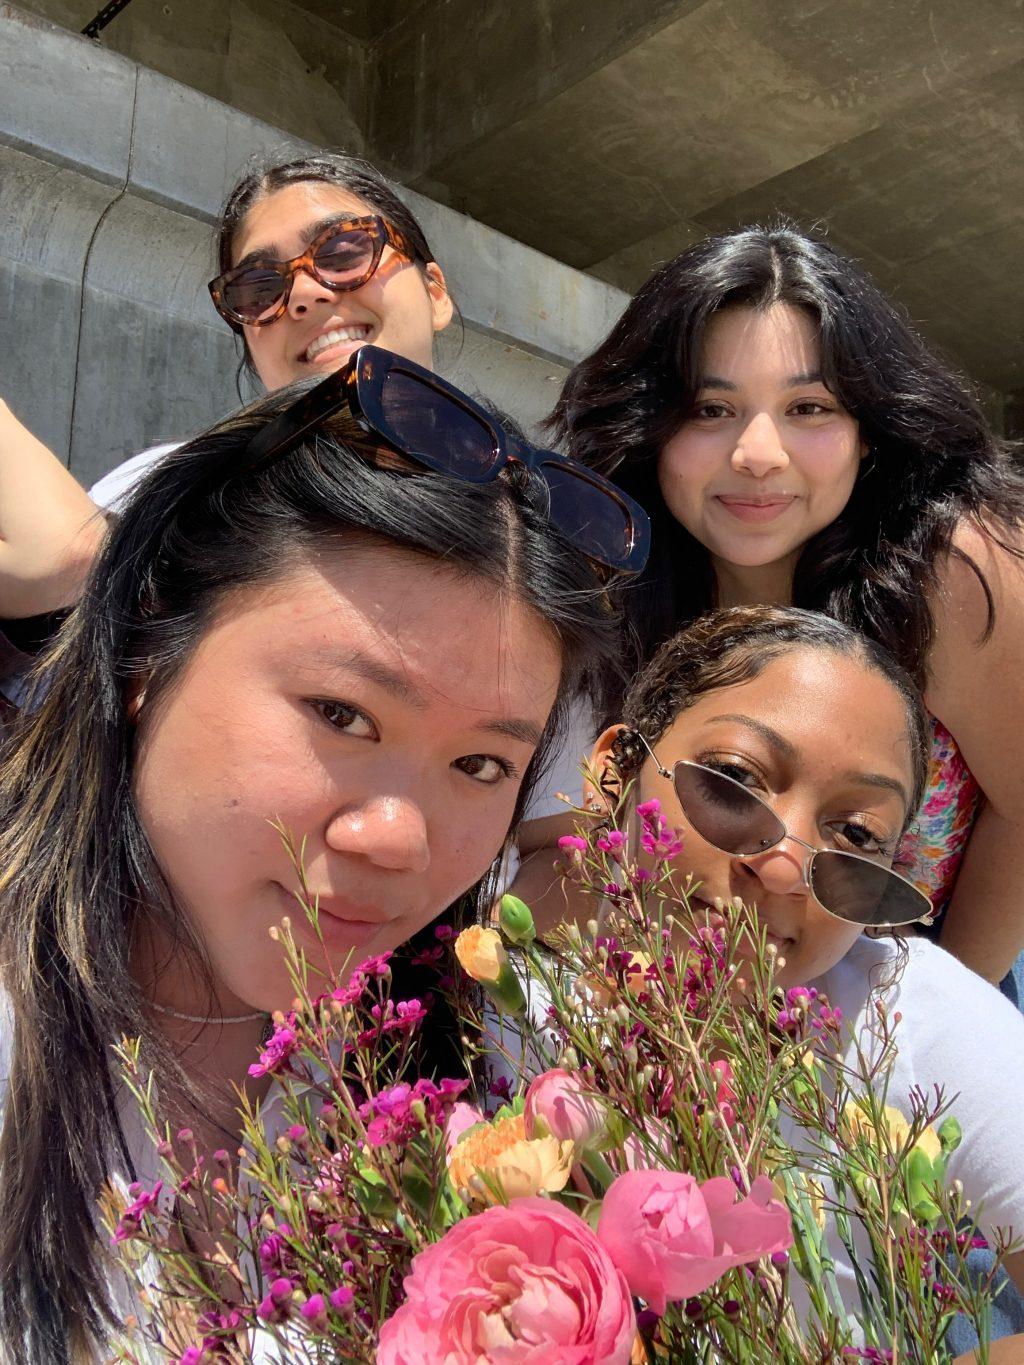 Alpha Omega first-years — (left to right) Serena Woon, Marie McGrath, Yamillah Hurtado, who is a copy editor for the Graphic, and Amani Pearson — have a beach day on Amarillo Beach in Malibu in April. Woon said they tanned at the beach, and it was one of the best days ever.